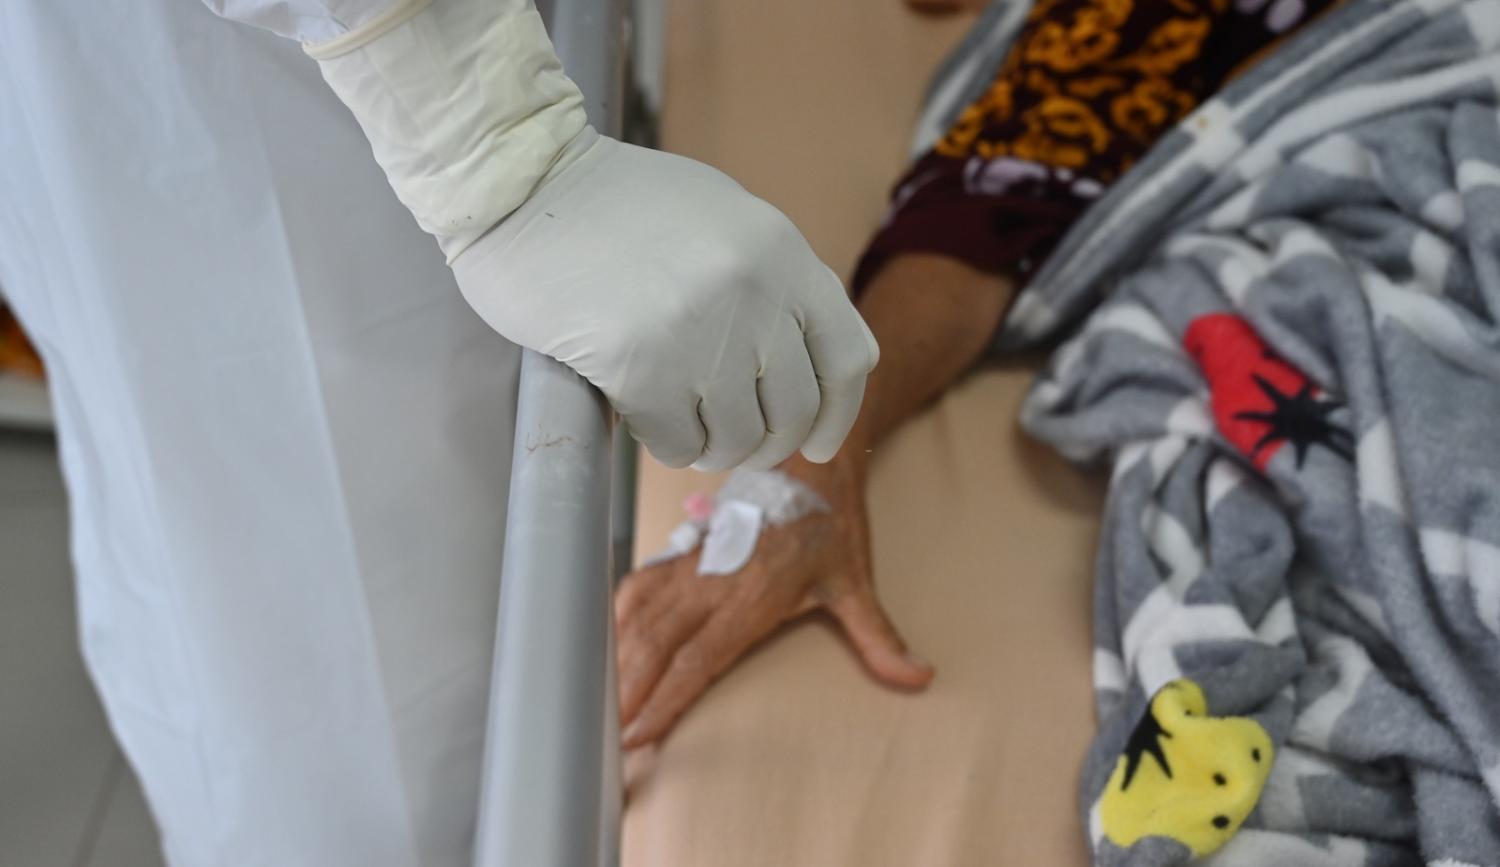 Long before the pandemic, Indonesia has been consistently underinvesting in its health sector: A Covid-19 patient at a general hospital in Bogor in January (Adek Berry/AFP via Getty Images)